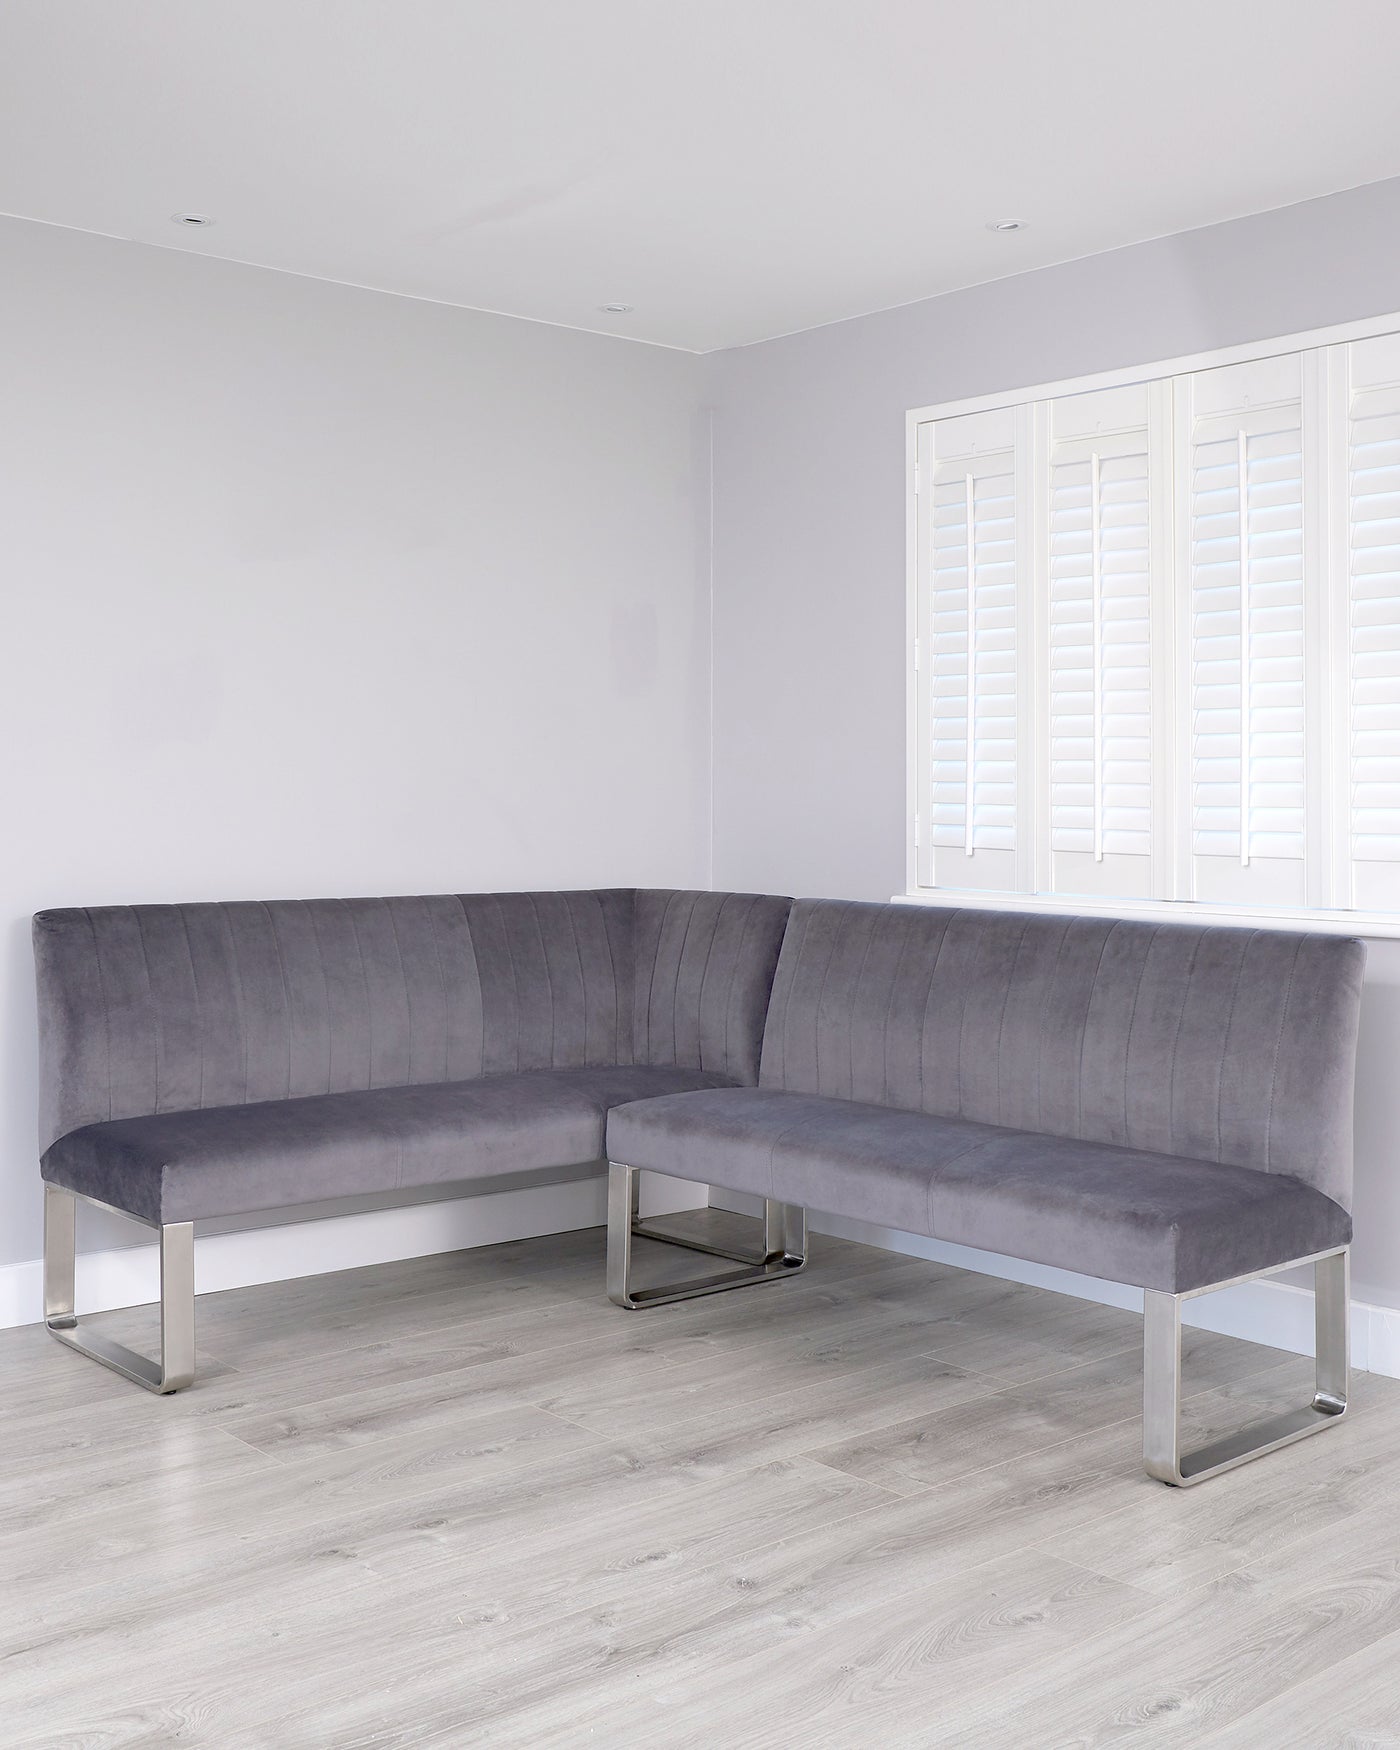 L-shaped modern corner bench with grey upholstery and sleek, chrome-finished metal legs.